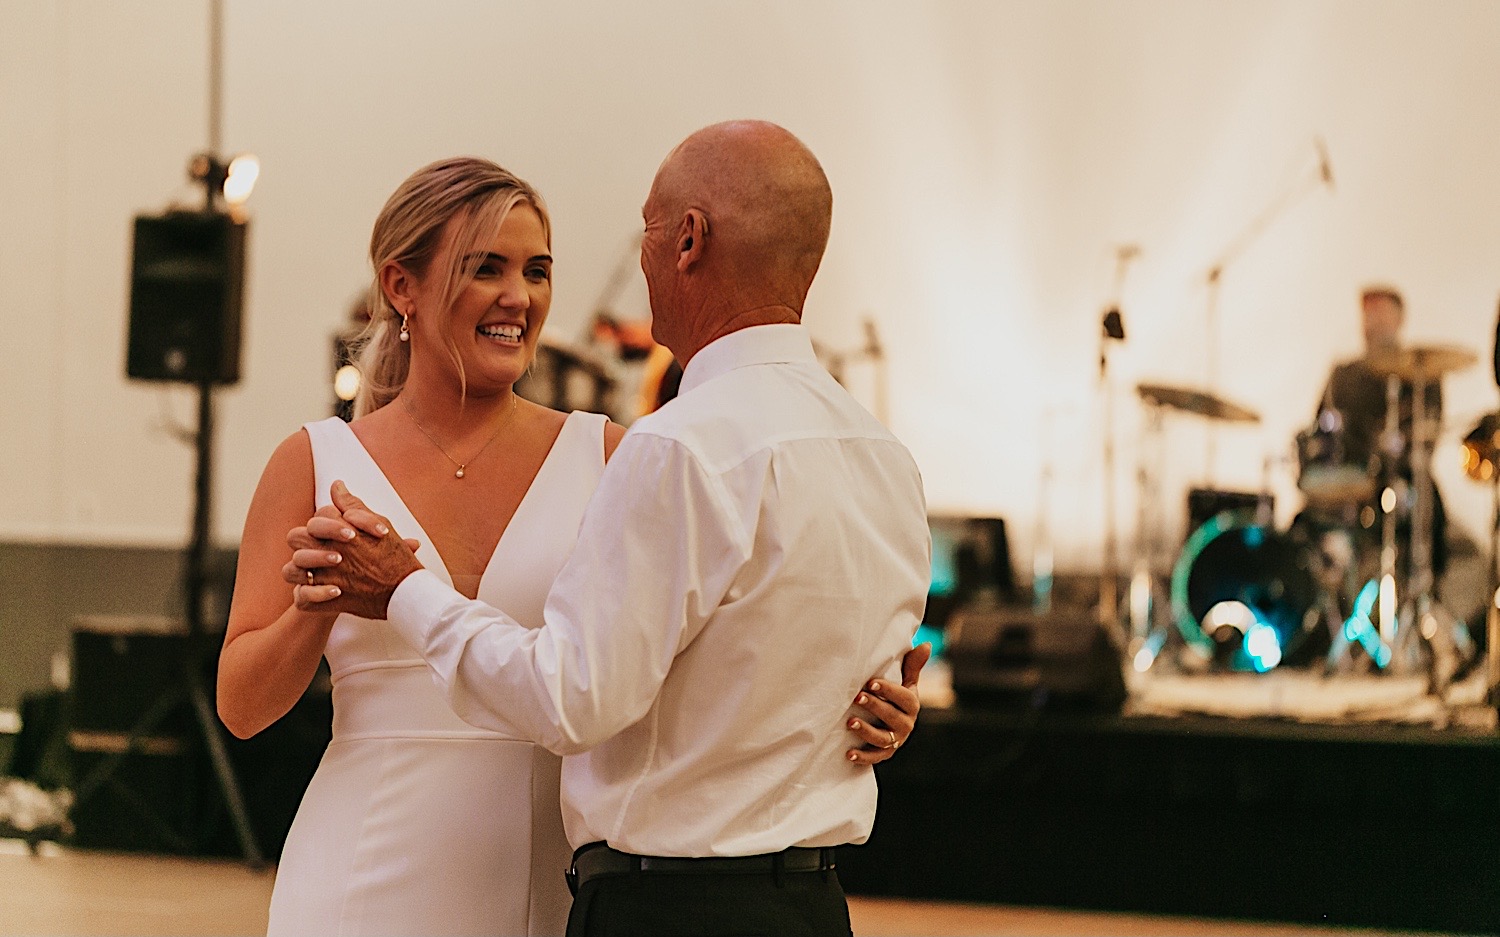 A bride smiles as she dances with her father during her wedding reception at the La Crosse Center while the live band plays behind them